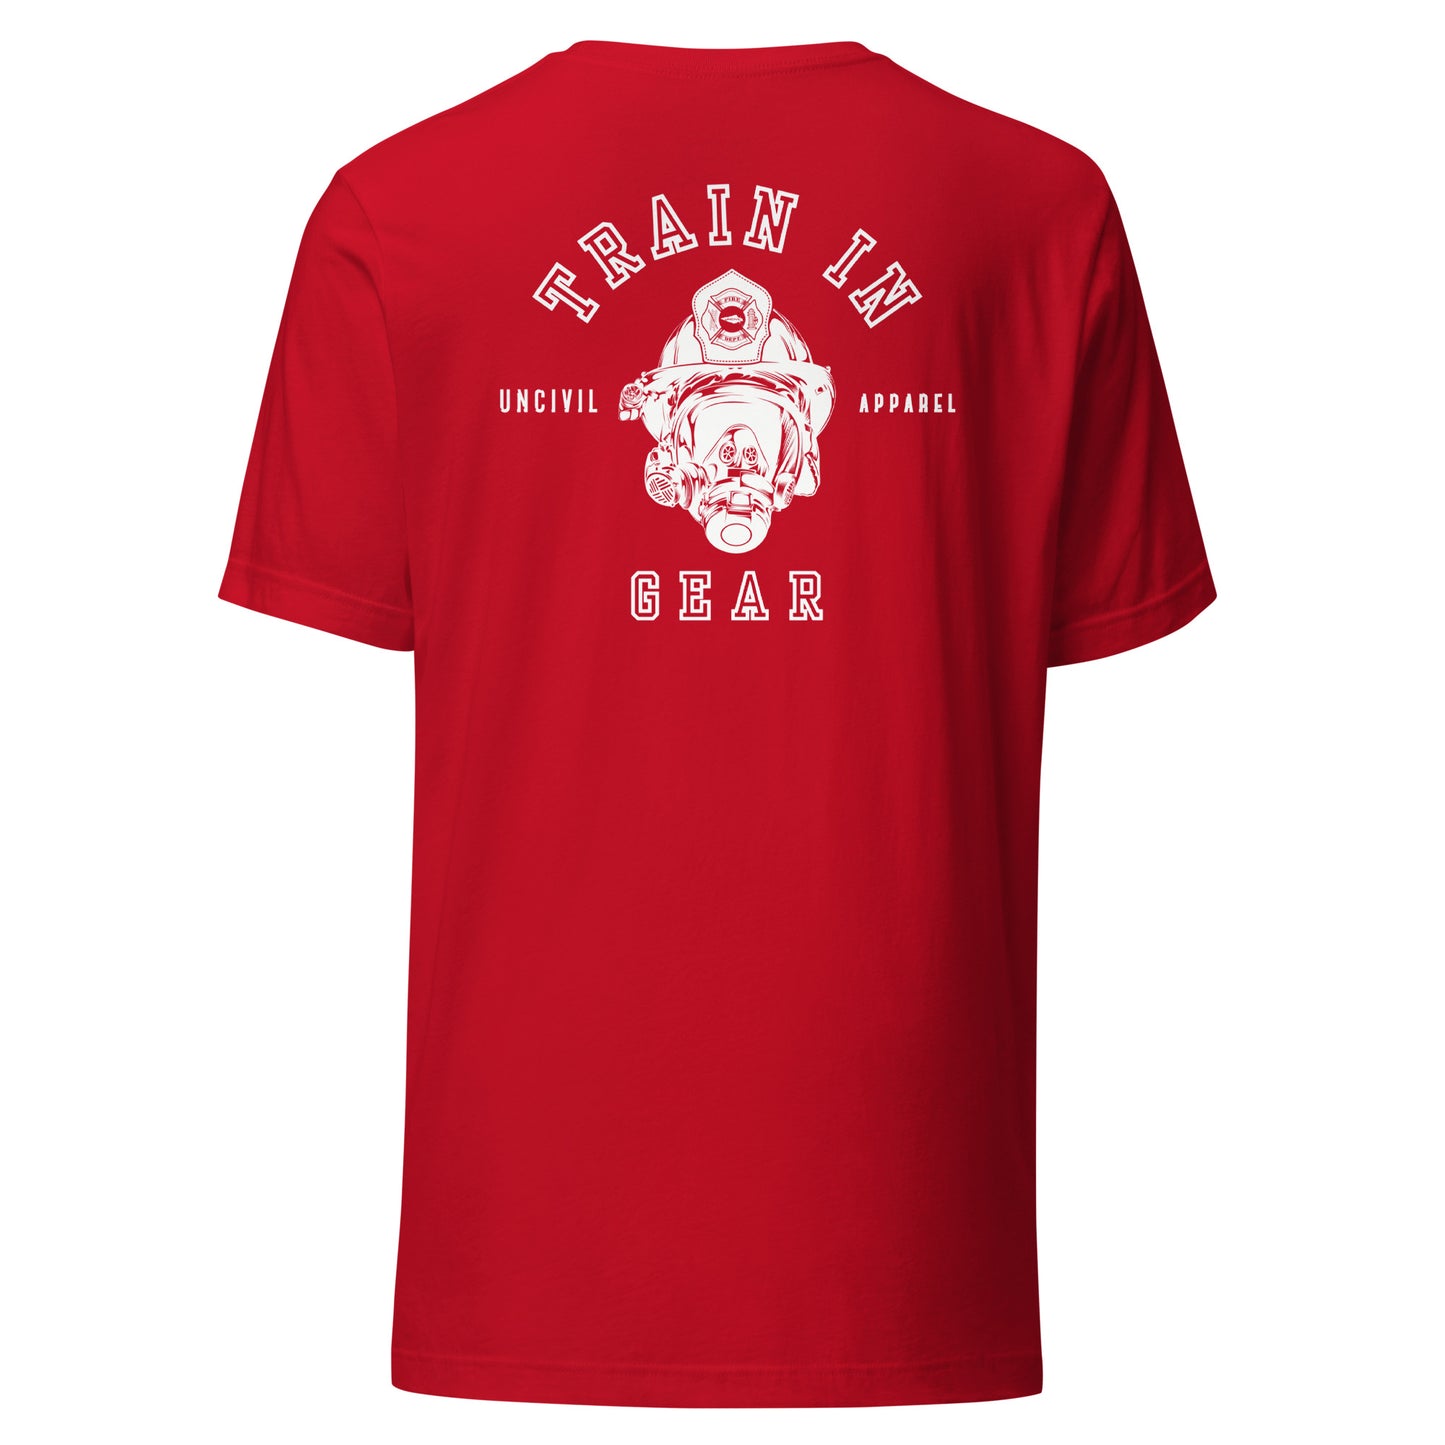 Train in Gear Graphic T-shirt, Firefighter and Military shirts, Red.